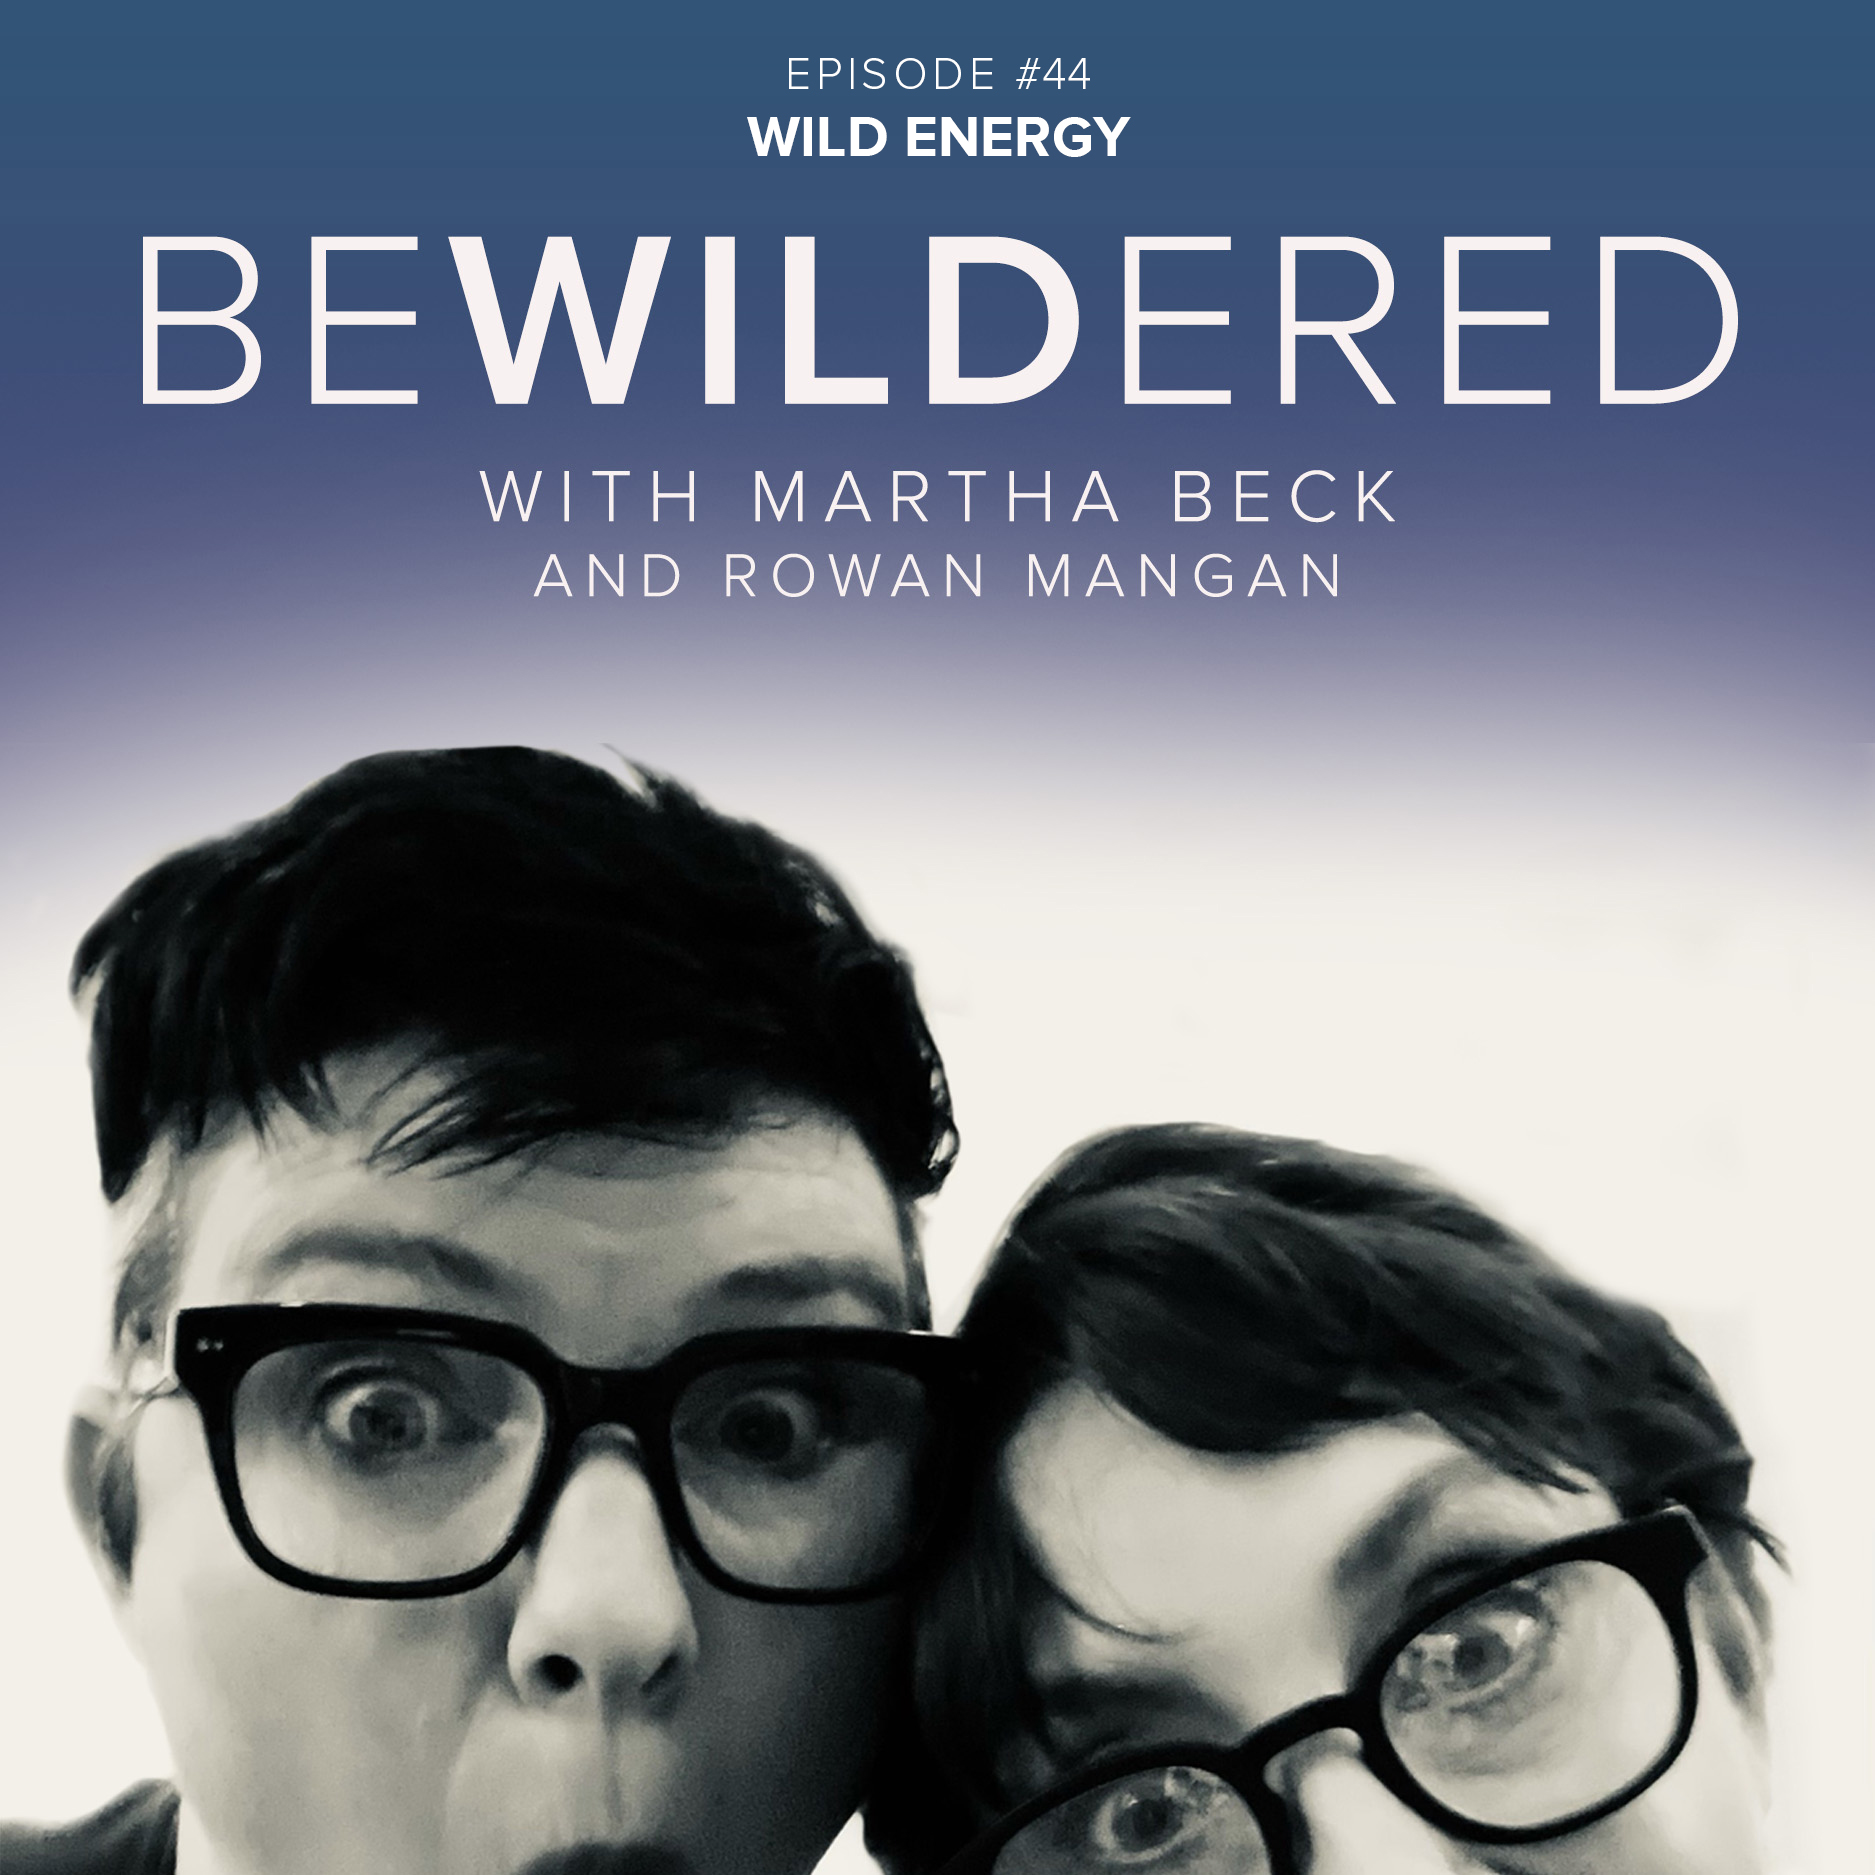 Image for Episode #44 Wild Energy for the Bewildered Podcast with Martha Beck and Rowan Mangan